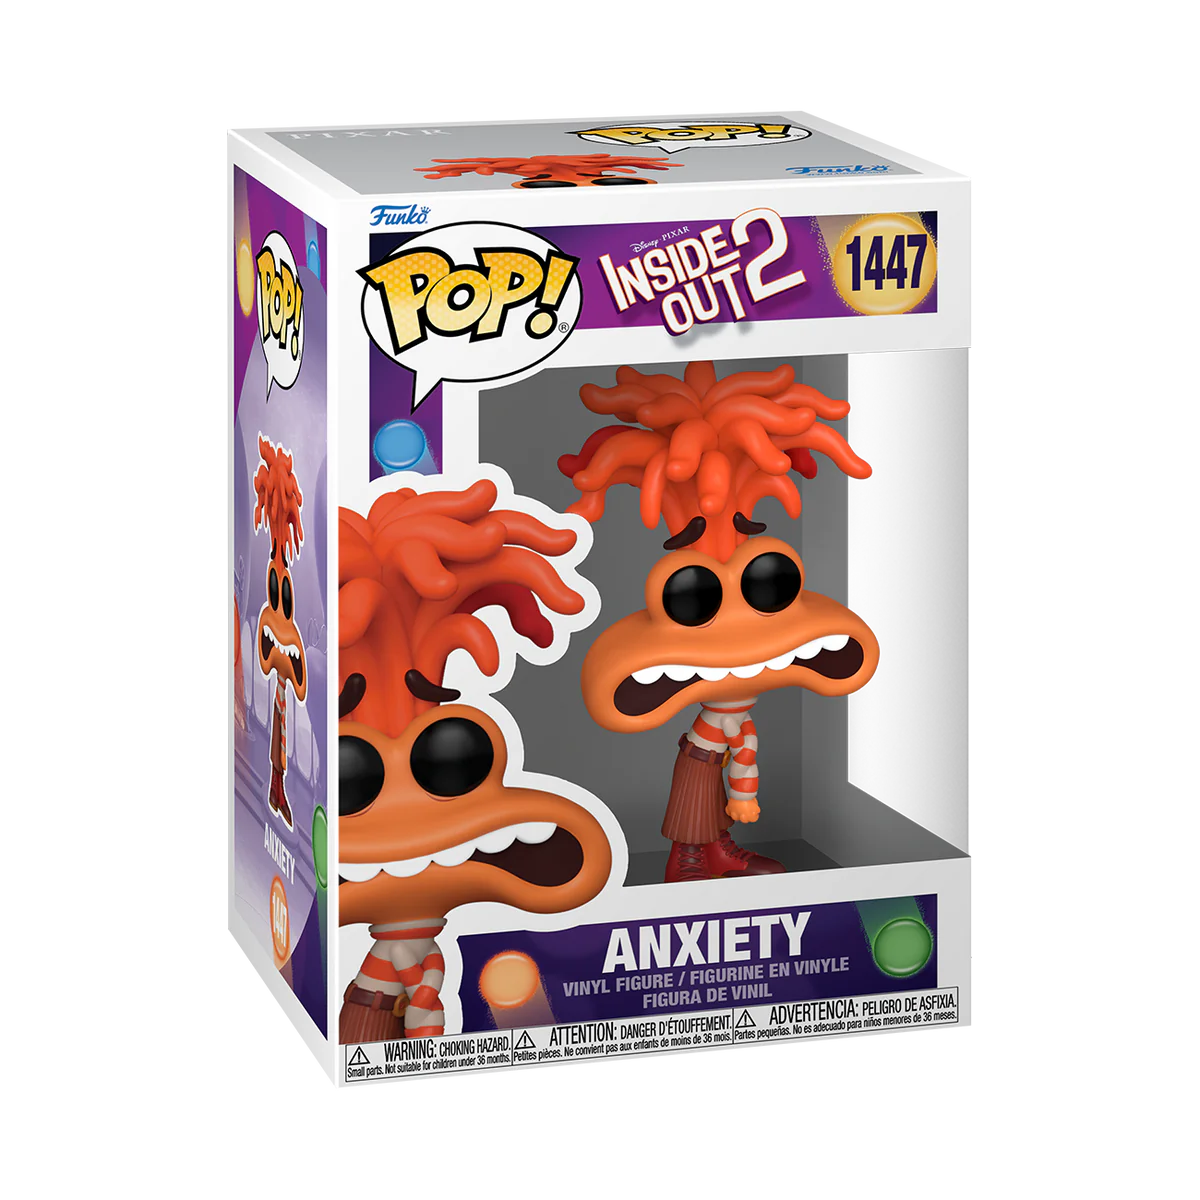 ANXIETY - INSIDE OUT 2